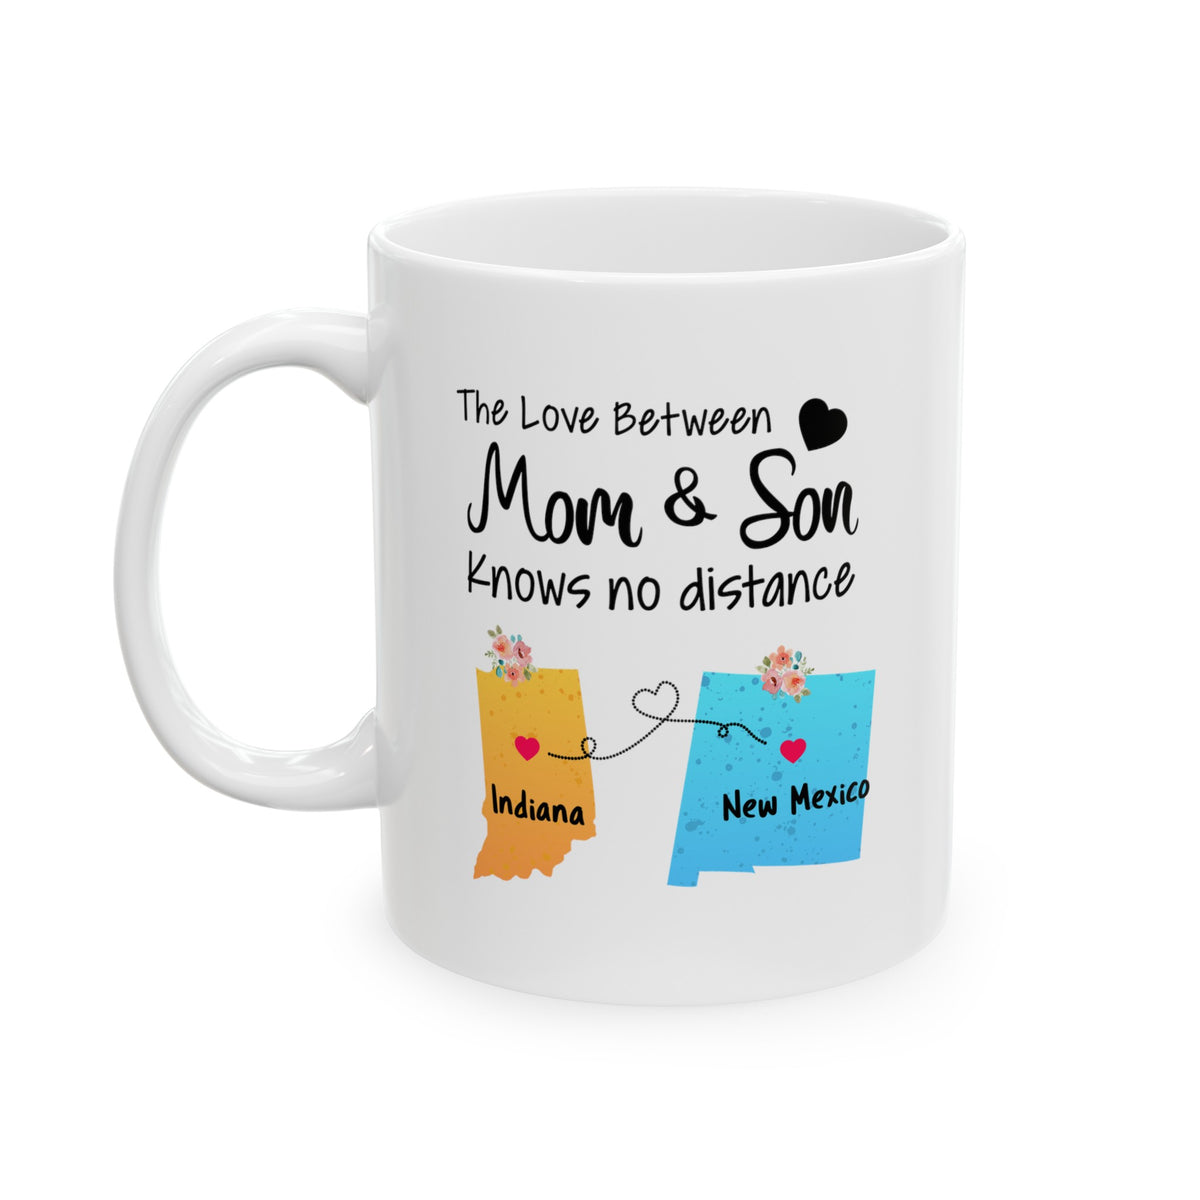 Indiana New Mexico Mother's Day Gifts - Love Mom & Son - Long Distance Home State 11 OZ Coffee Mug for Mom